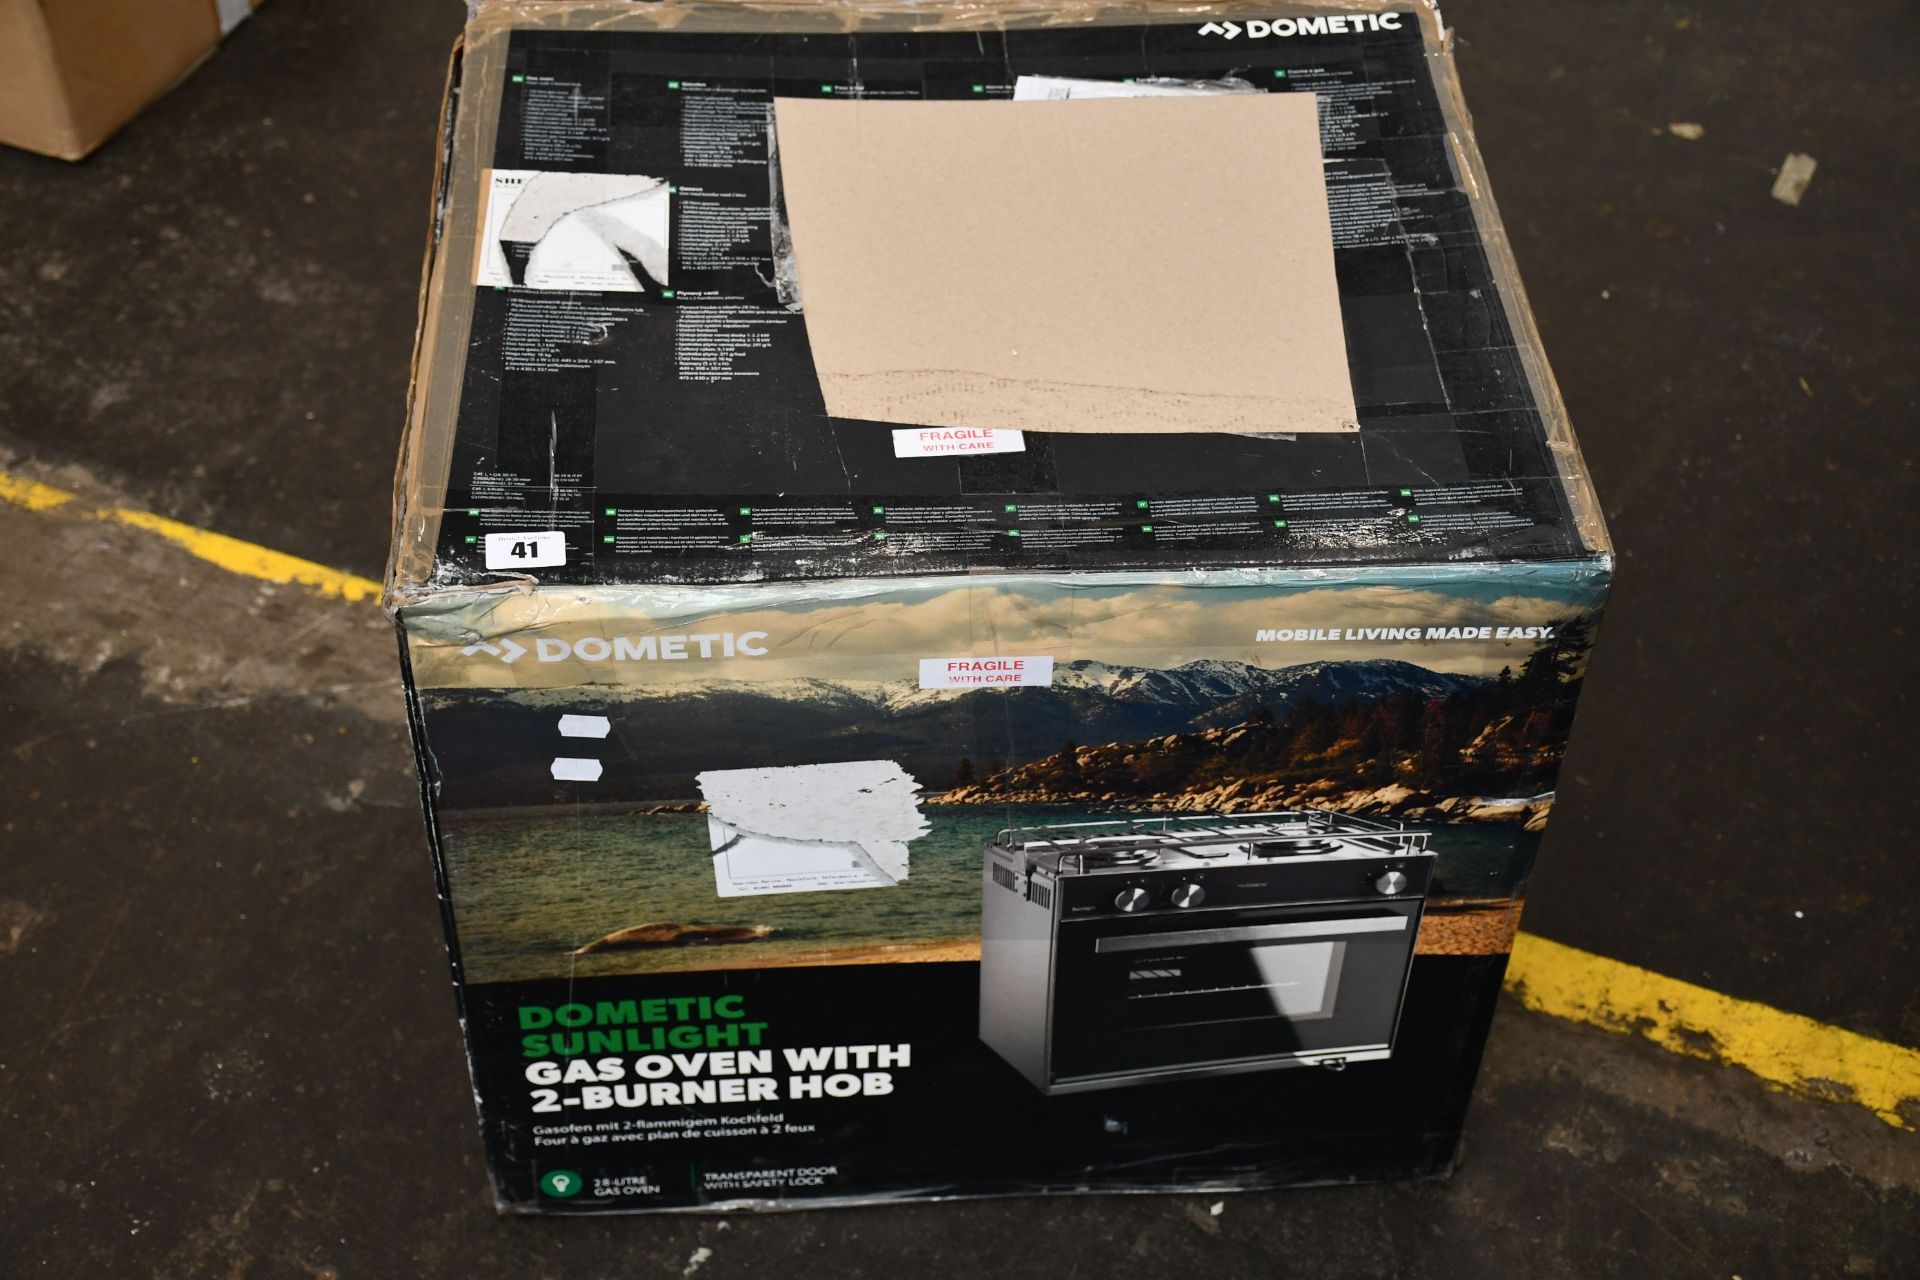 One boxed Dometic Sunlight gas oven with 2-burner hob.